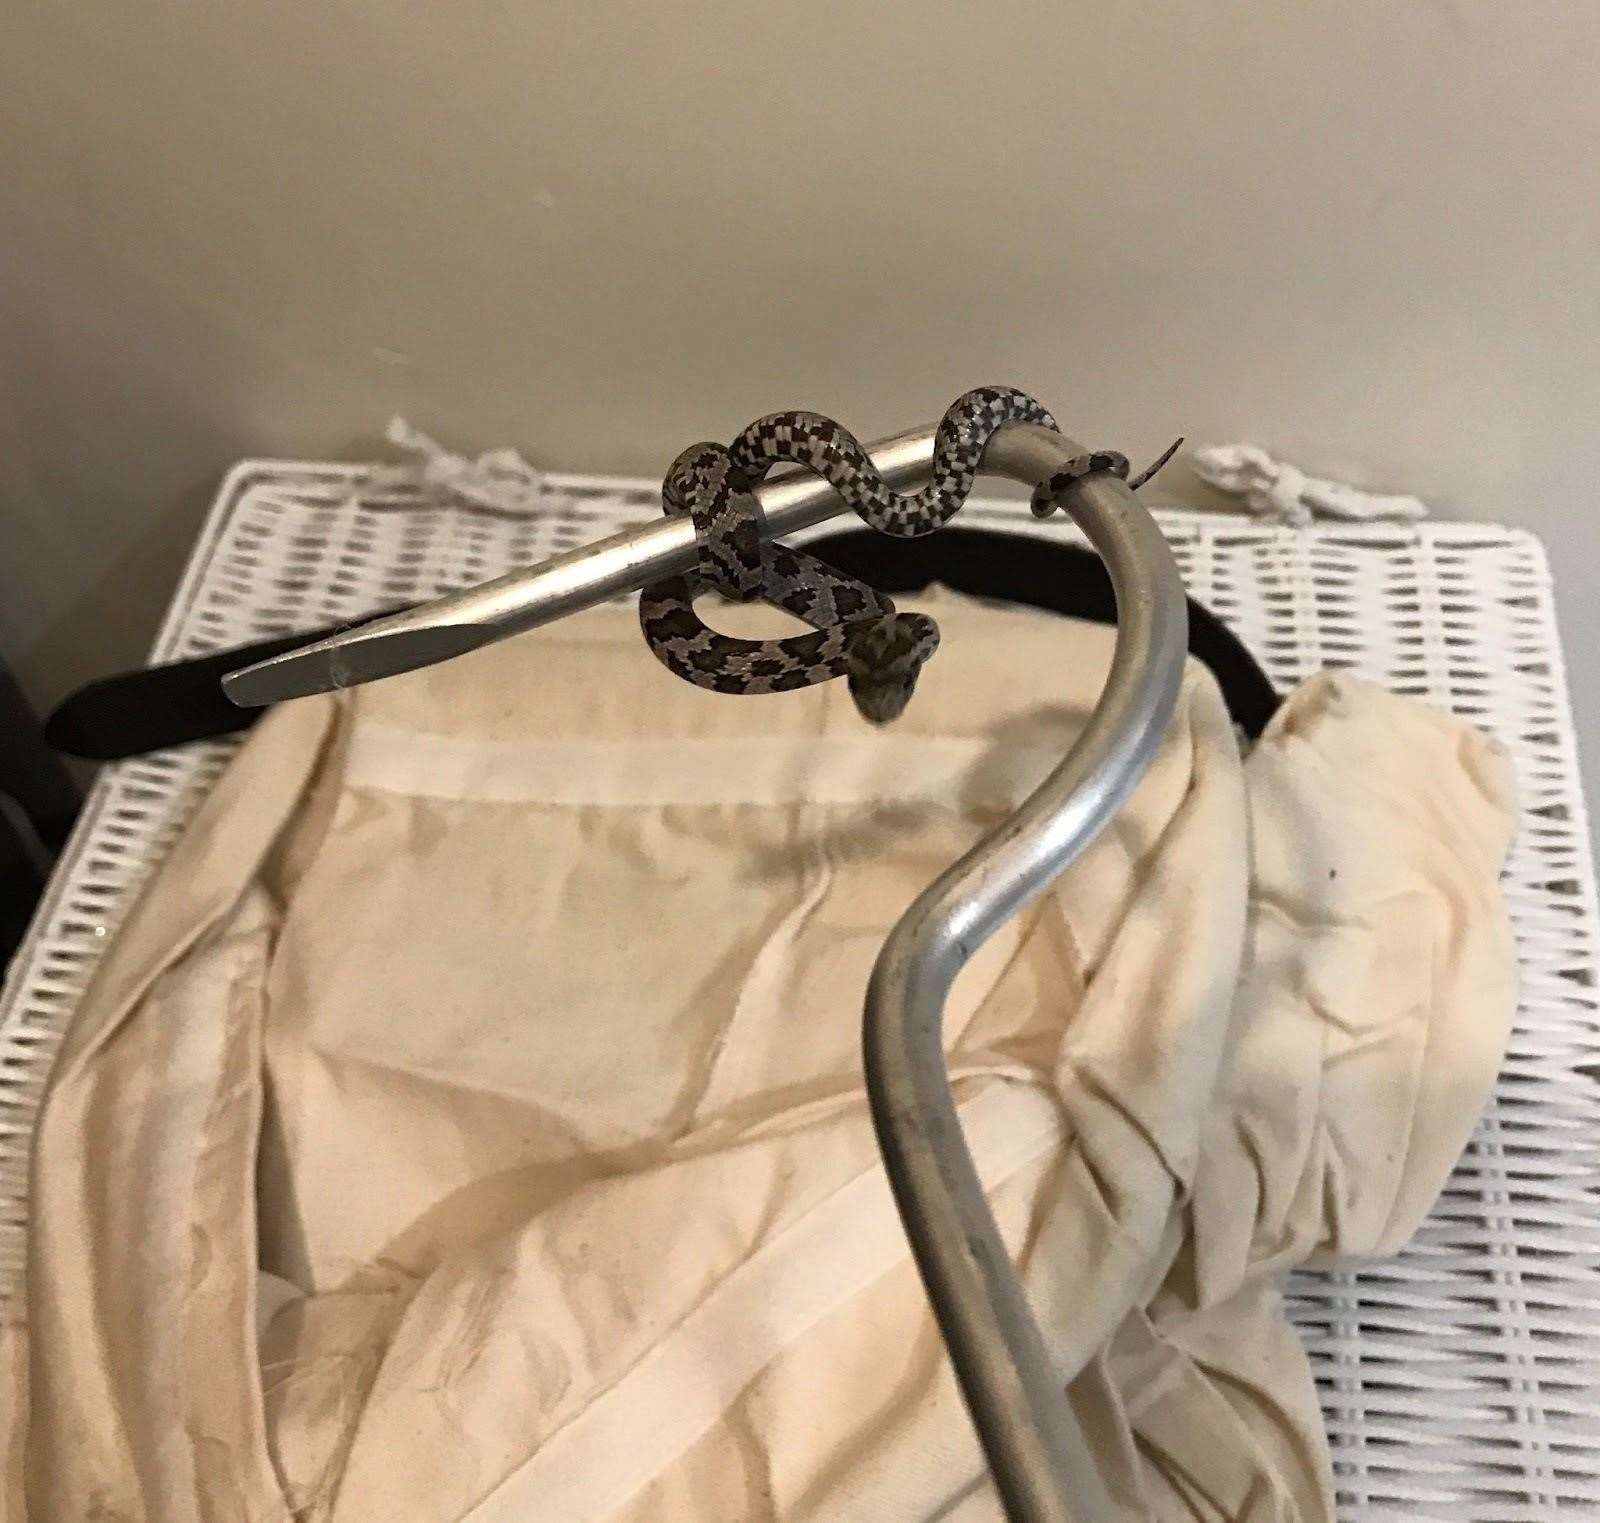 The snake found under the microwave. Picture: RSPCA